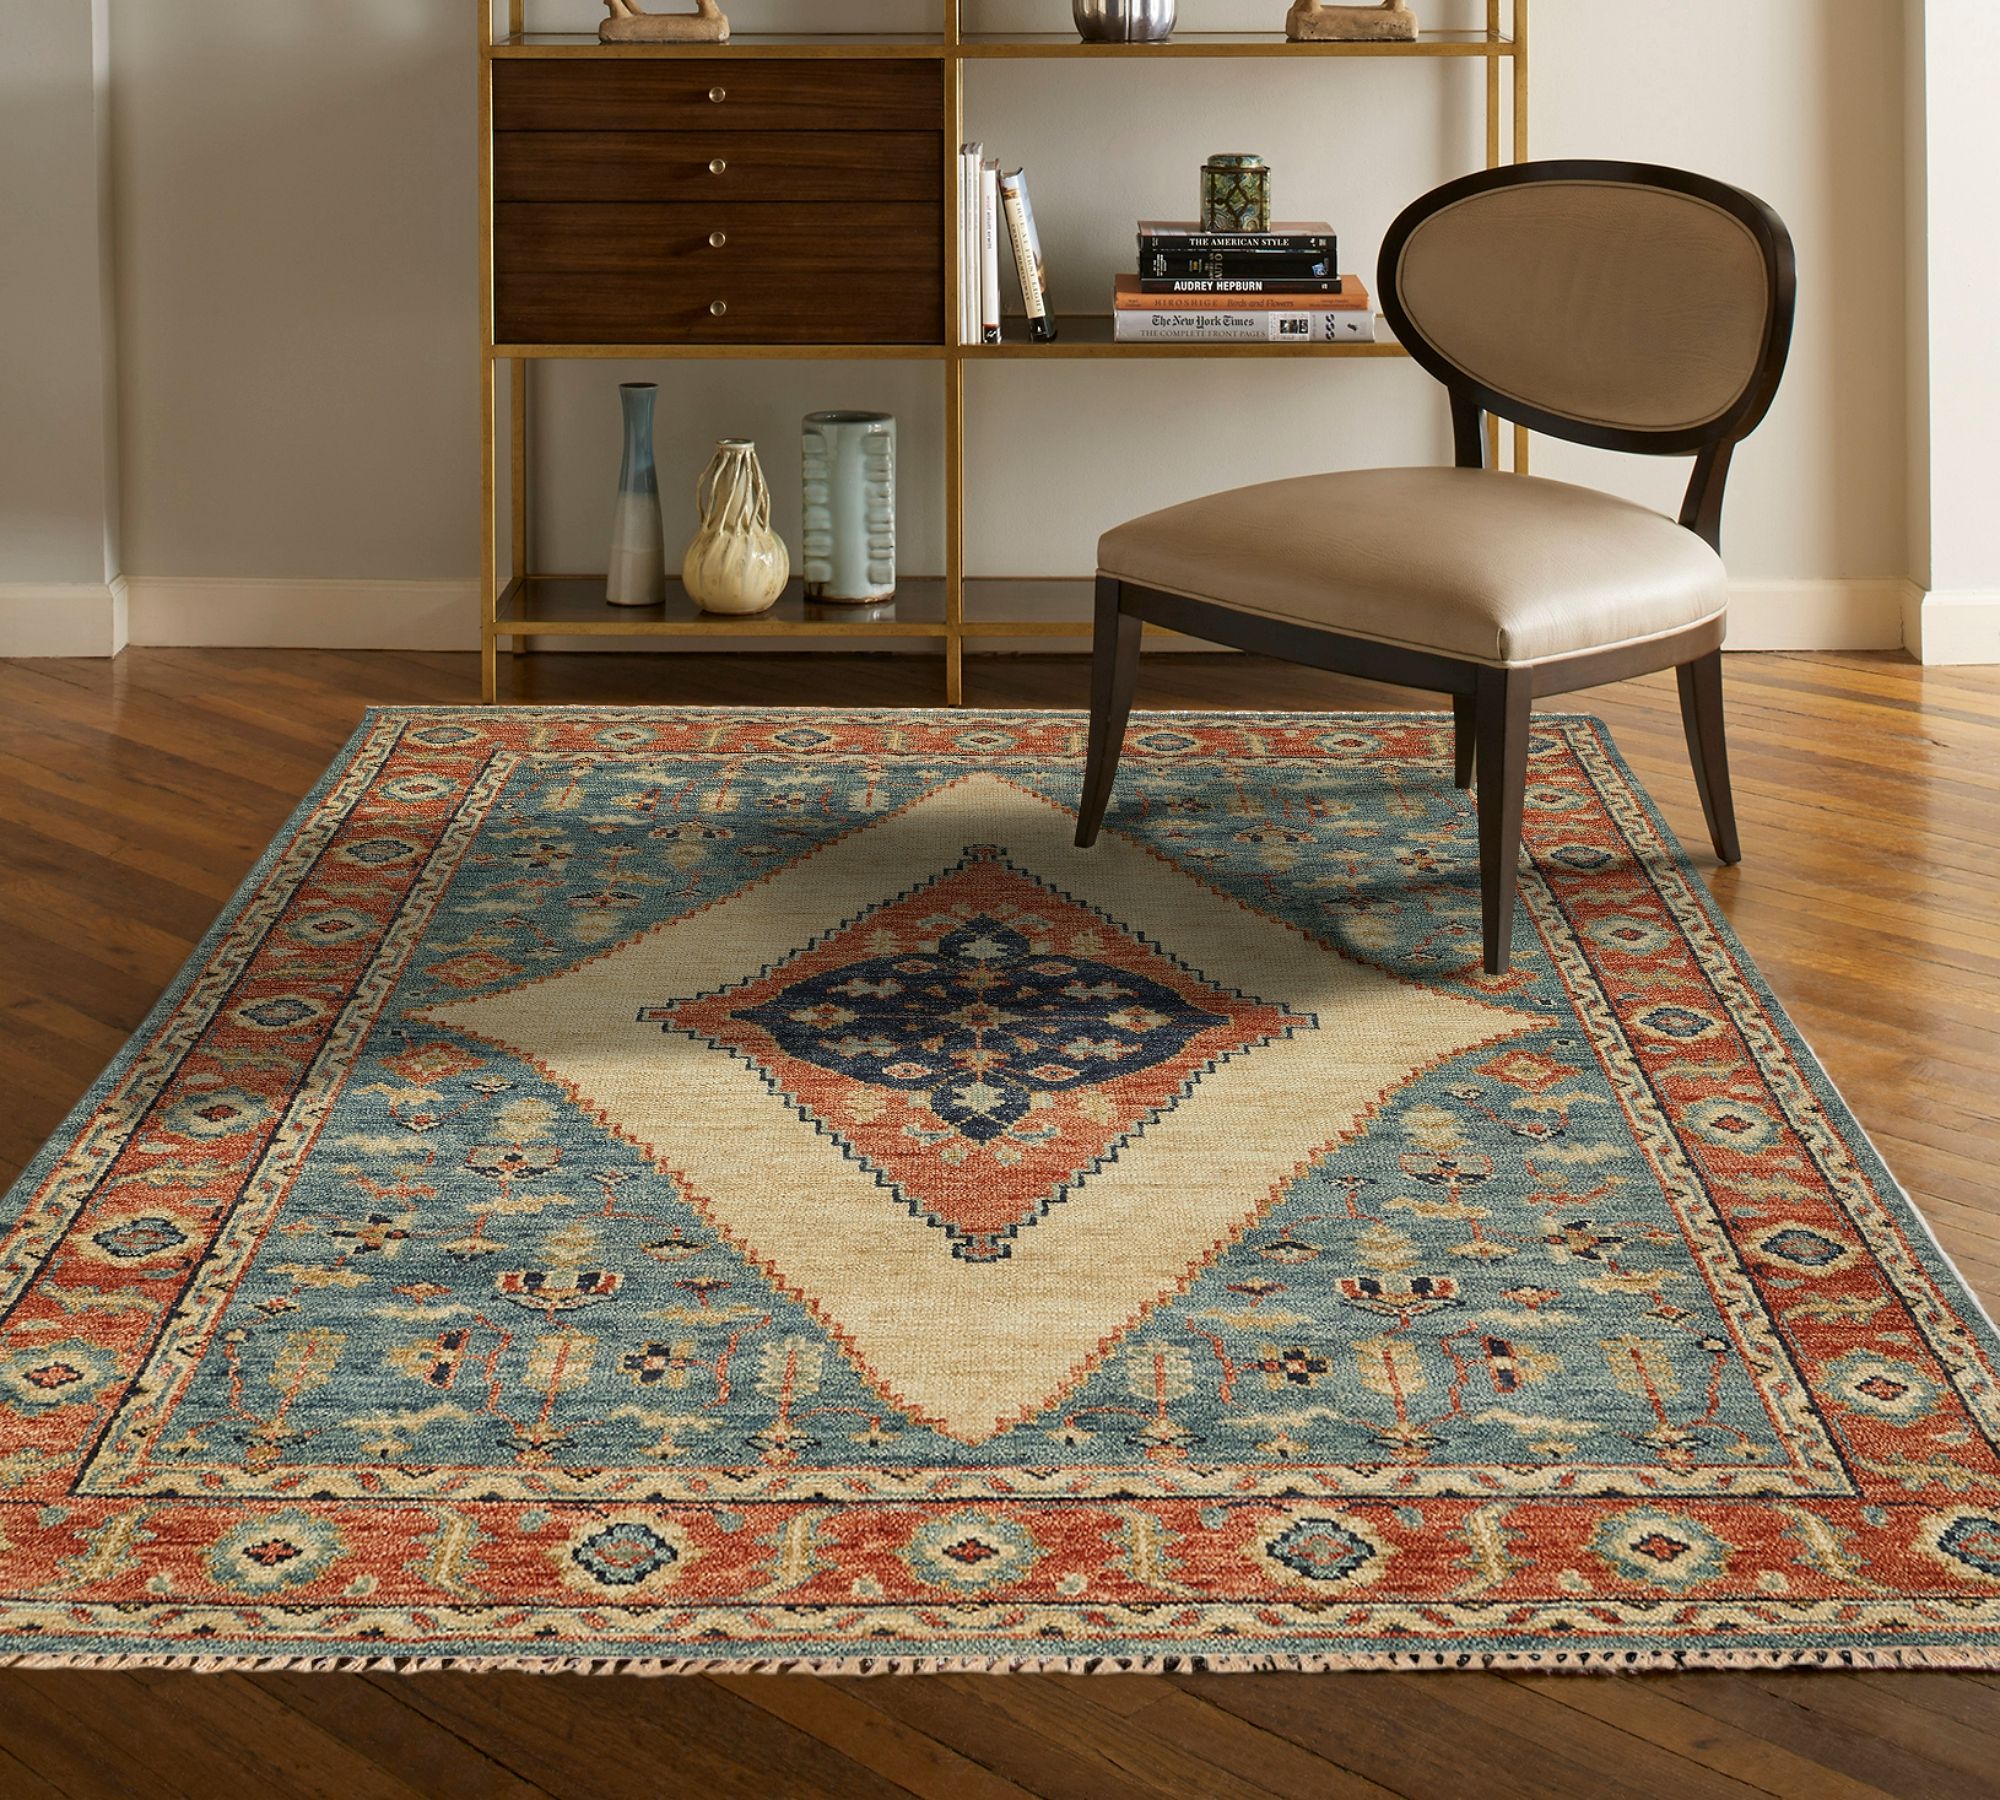 Keyli Hand-Knotted Wool Persian-Style Rug